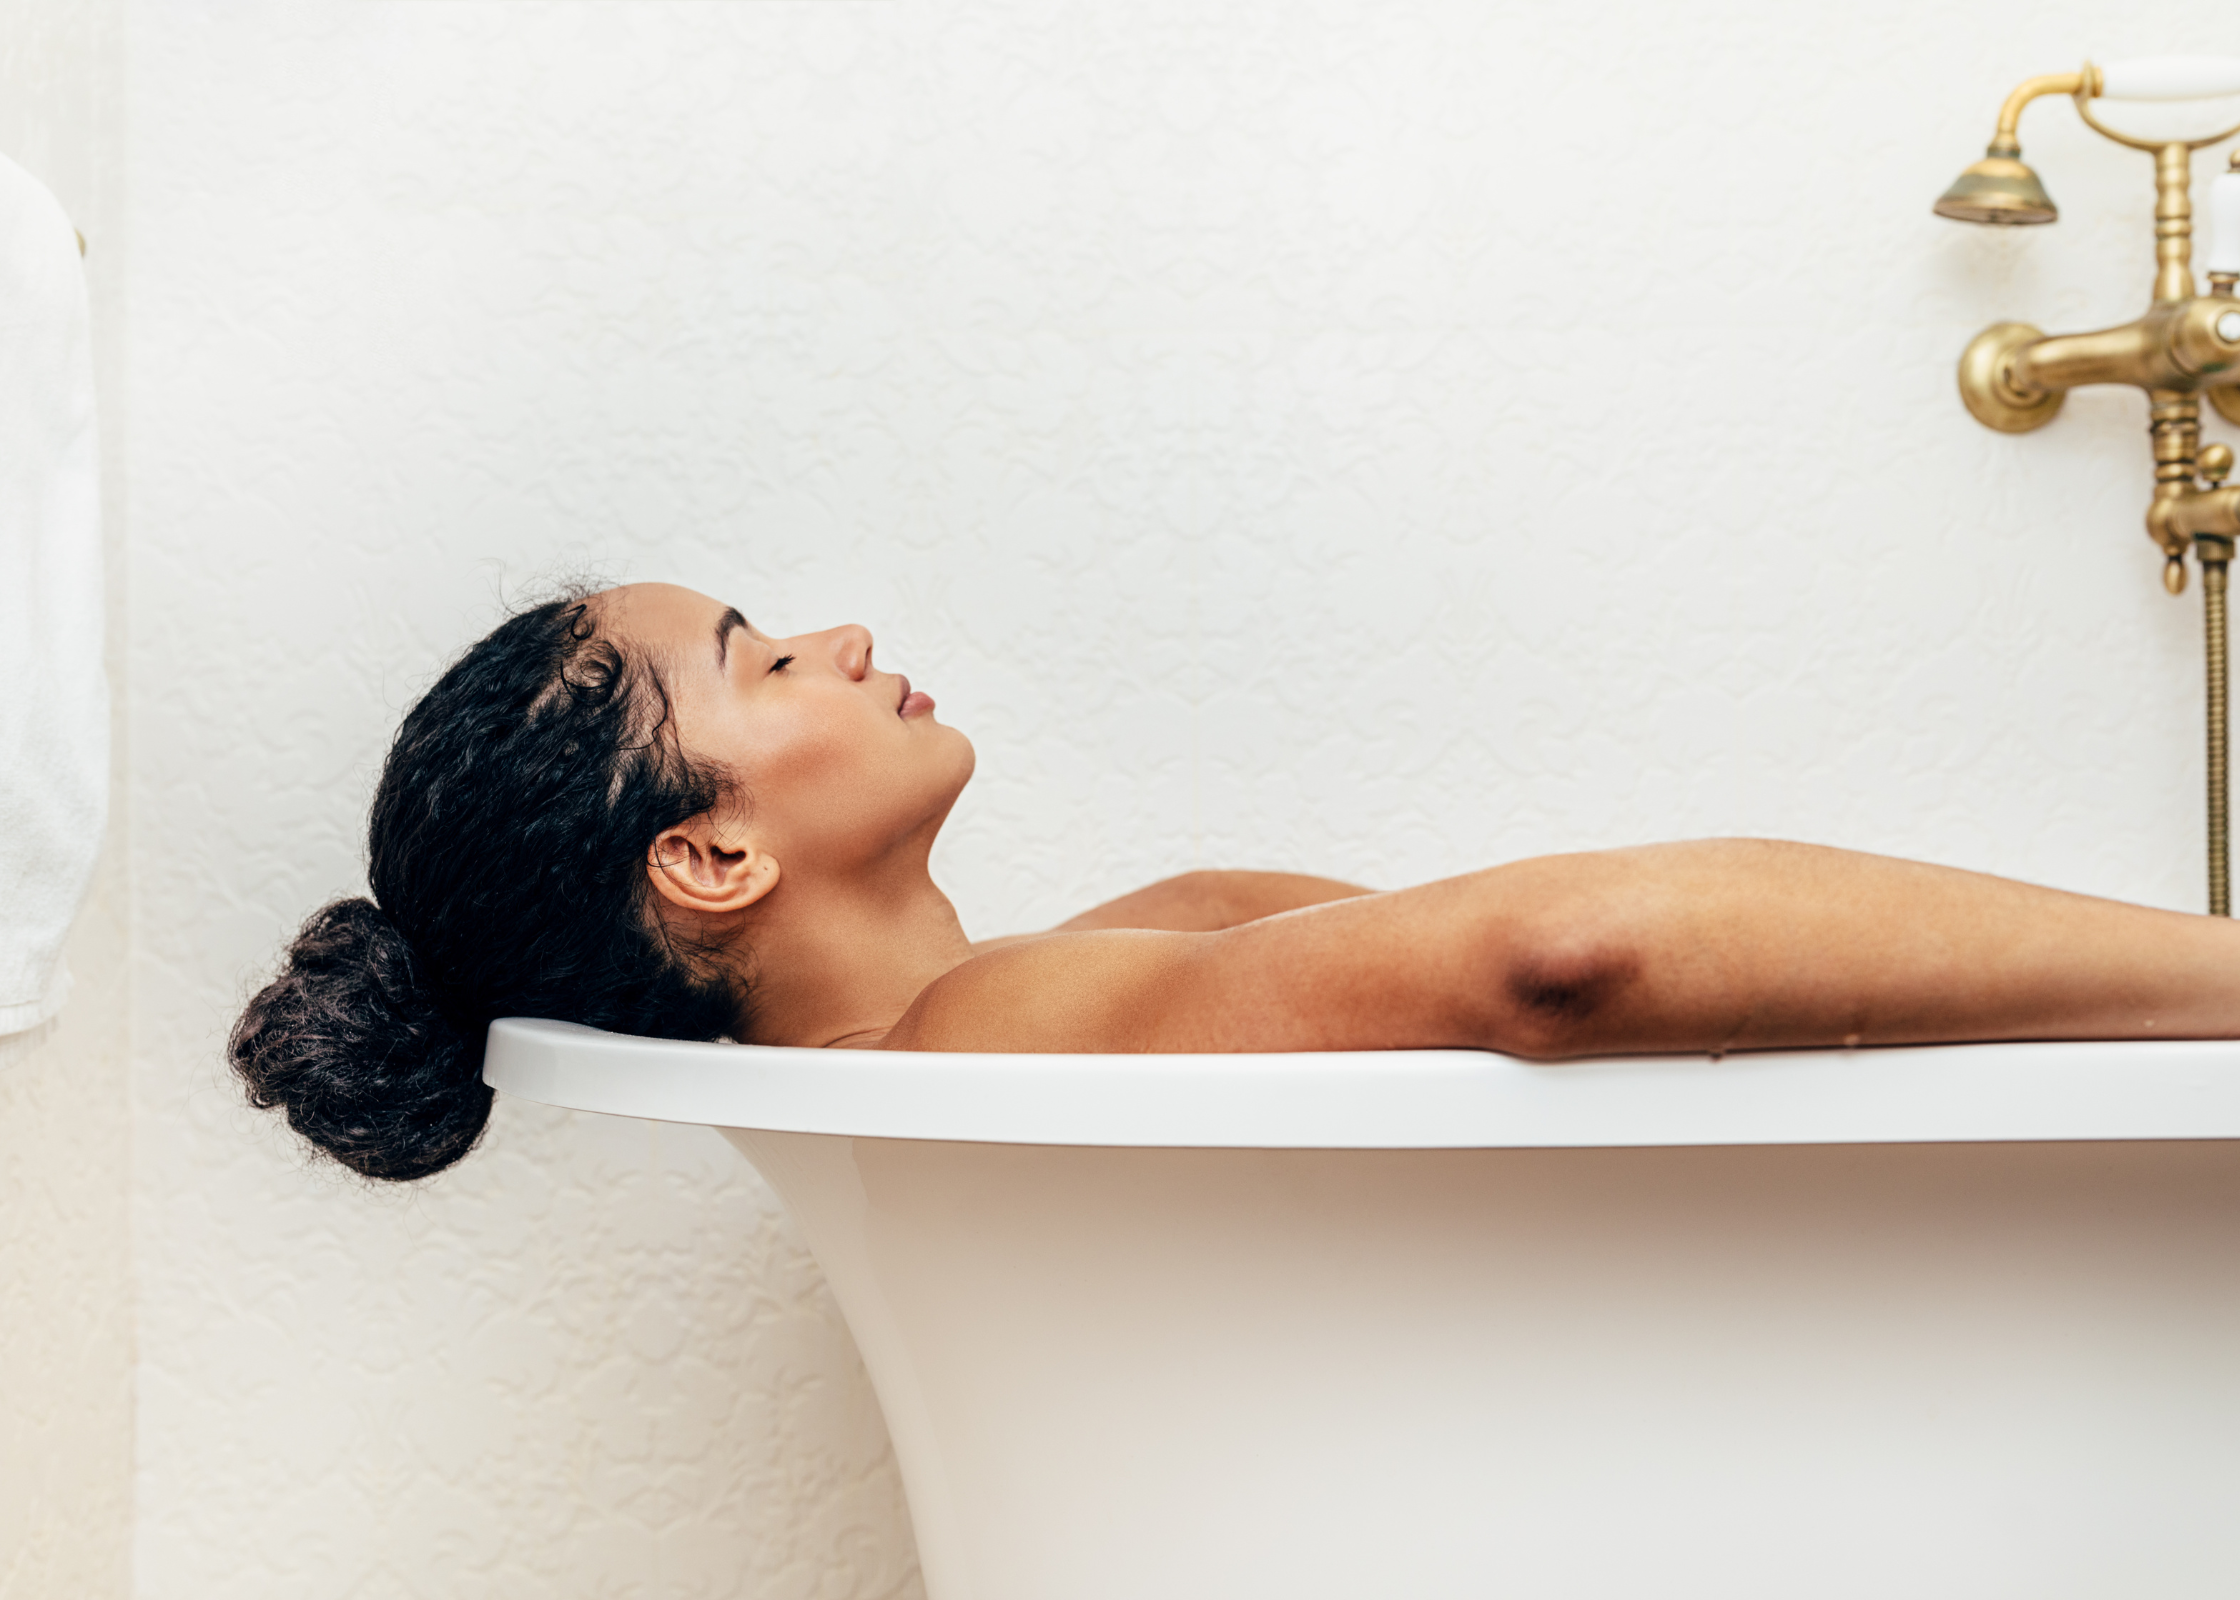 black woman taking a bath. relax after a long, hard, stressful day at work or at home. Ways to unwind and decompress after a busy day and relieve stress.